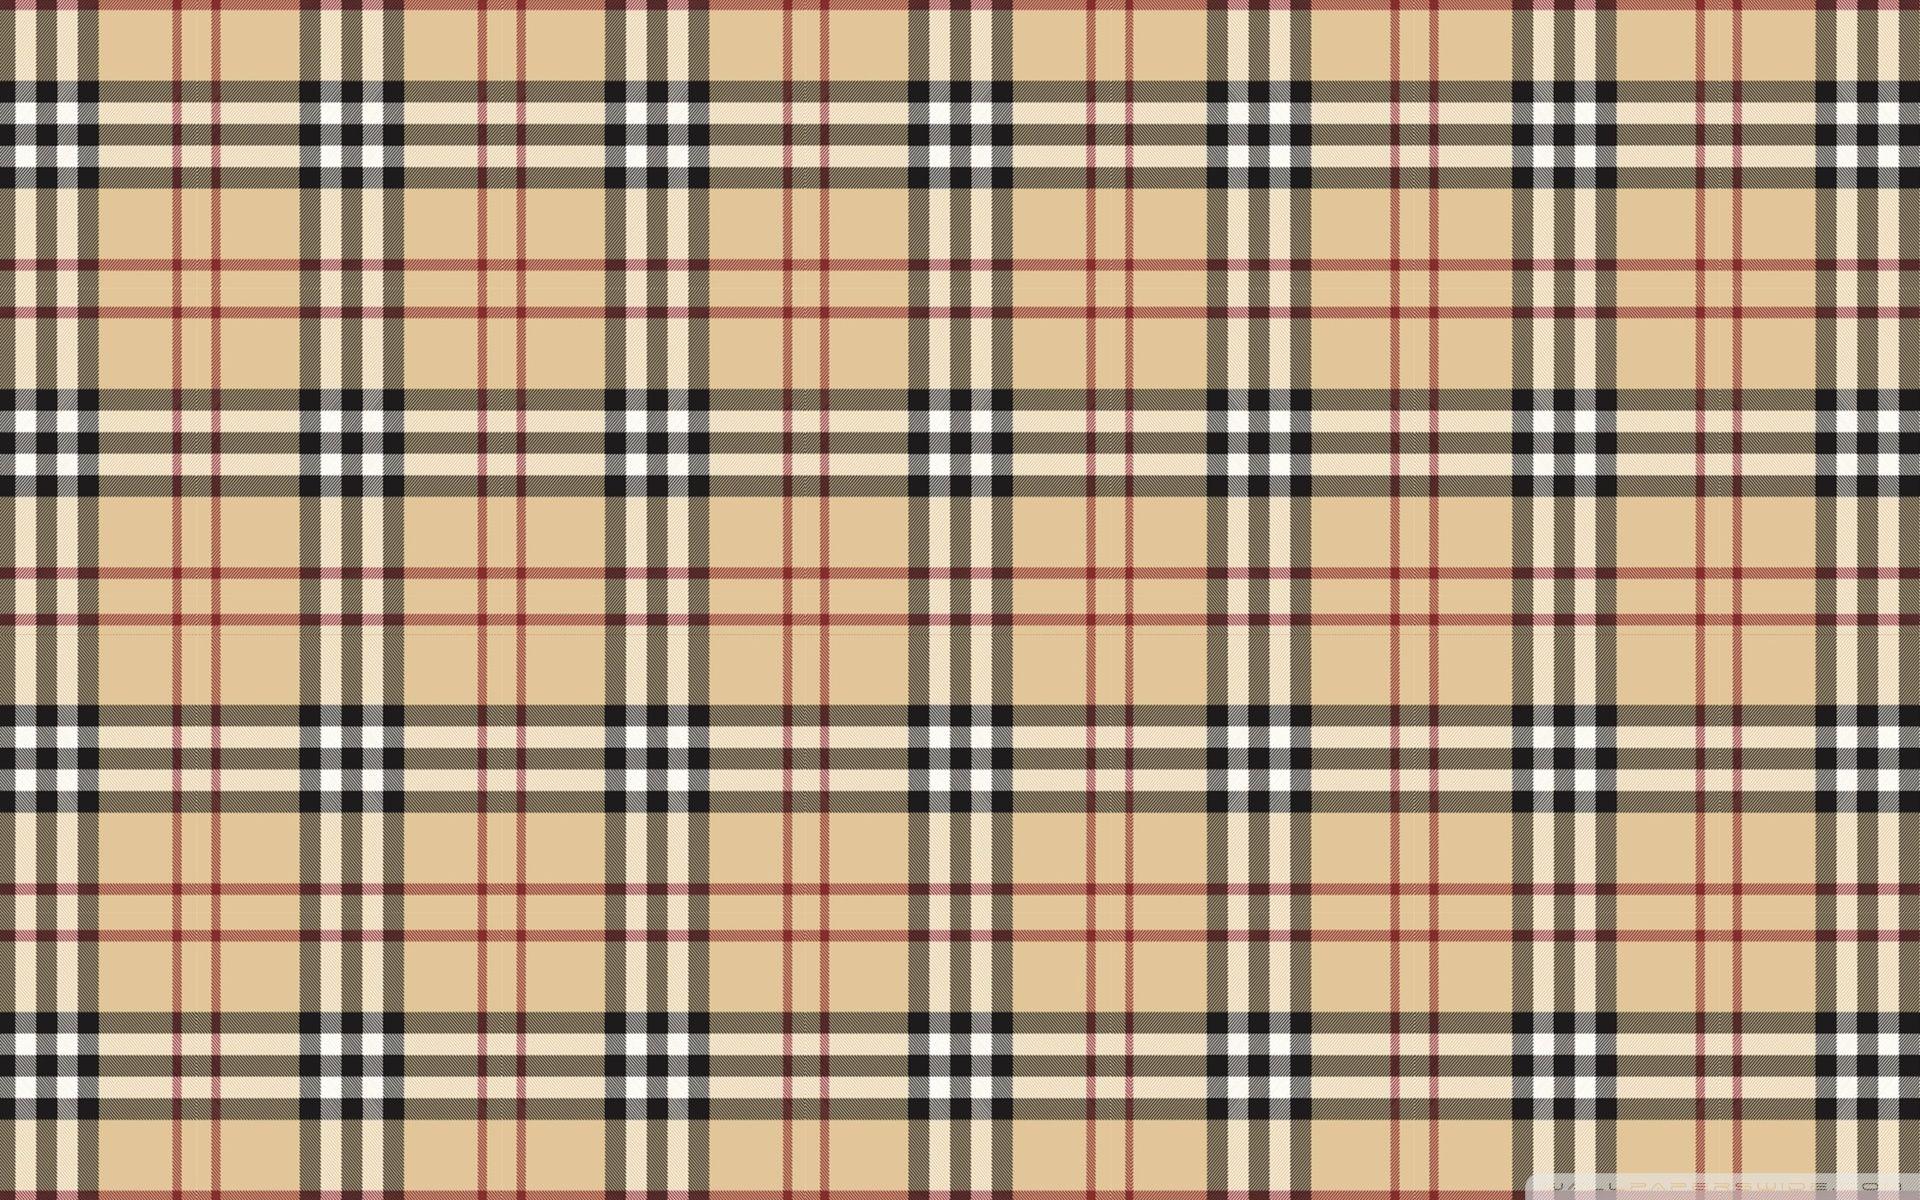 Burberry Pattern - Free Burberry Pattern Backgrounds -